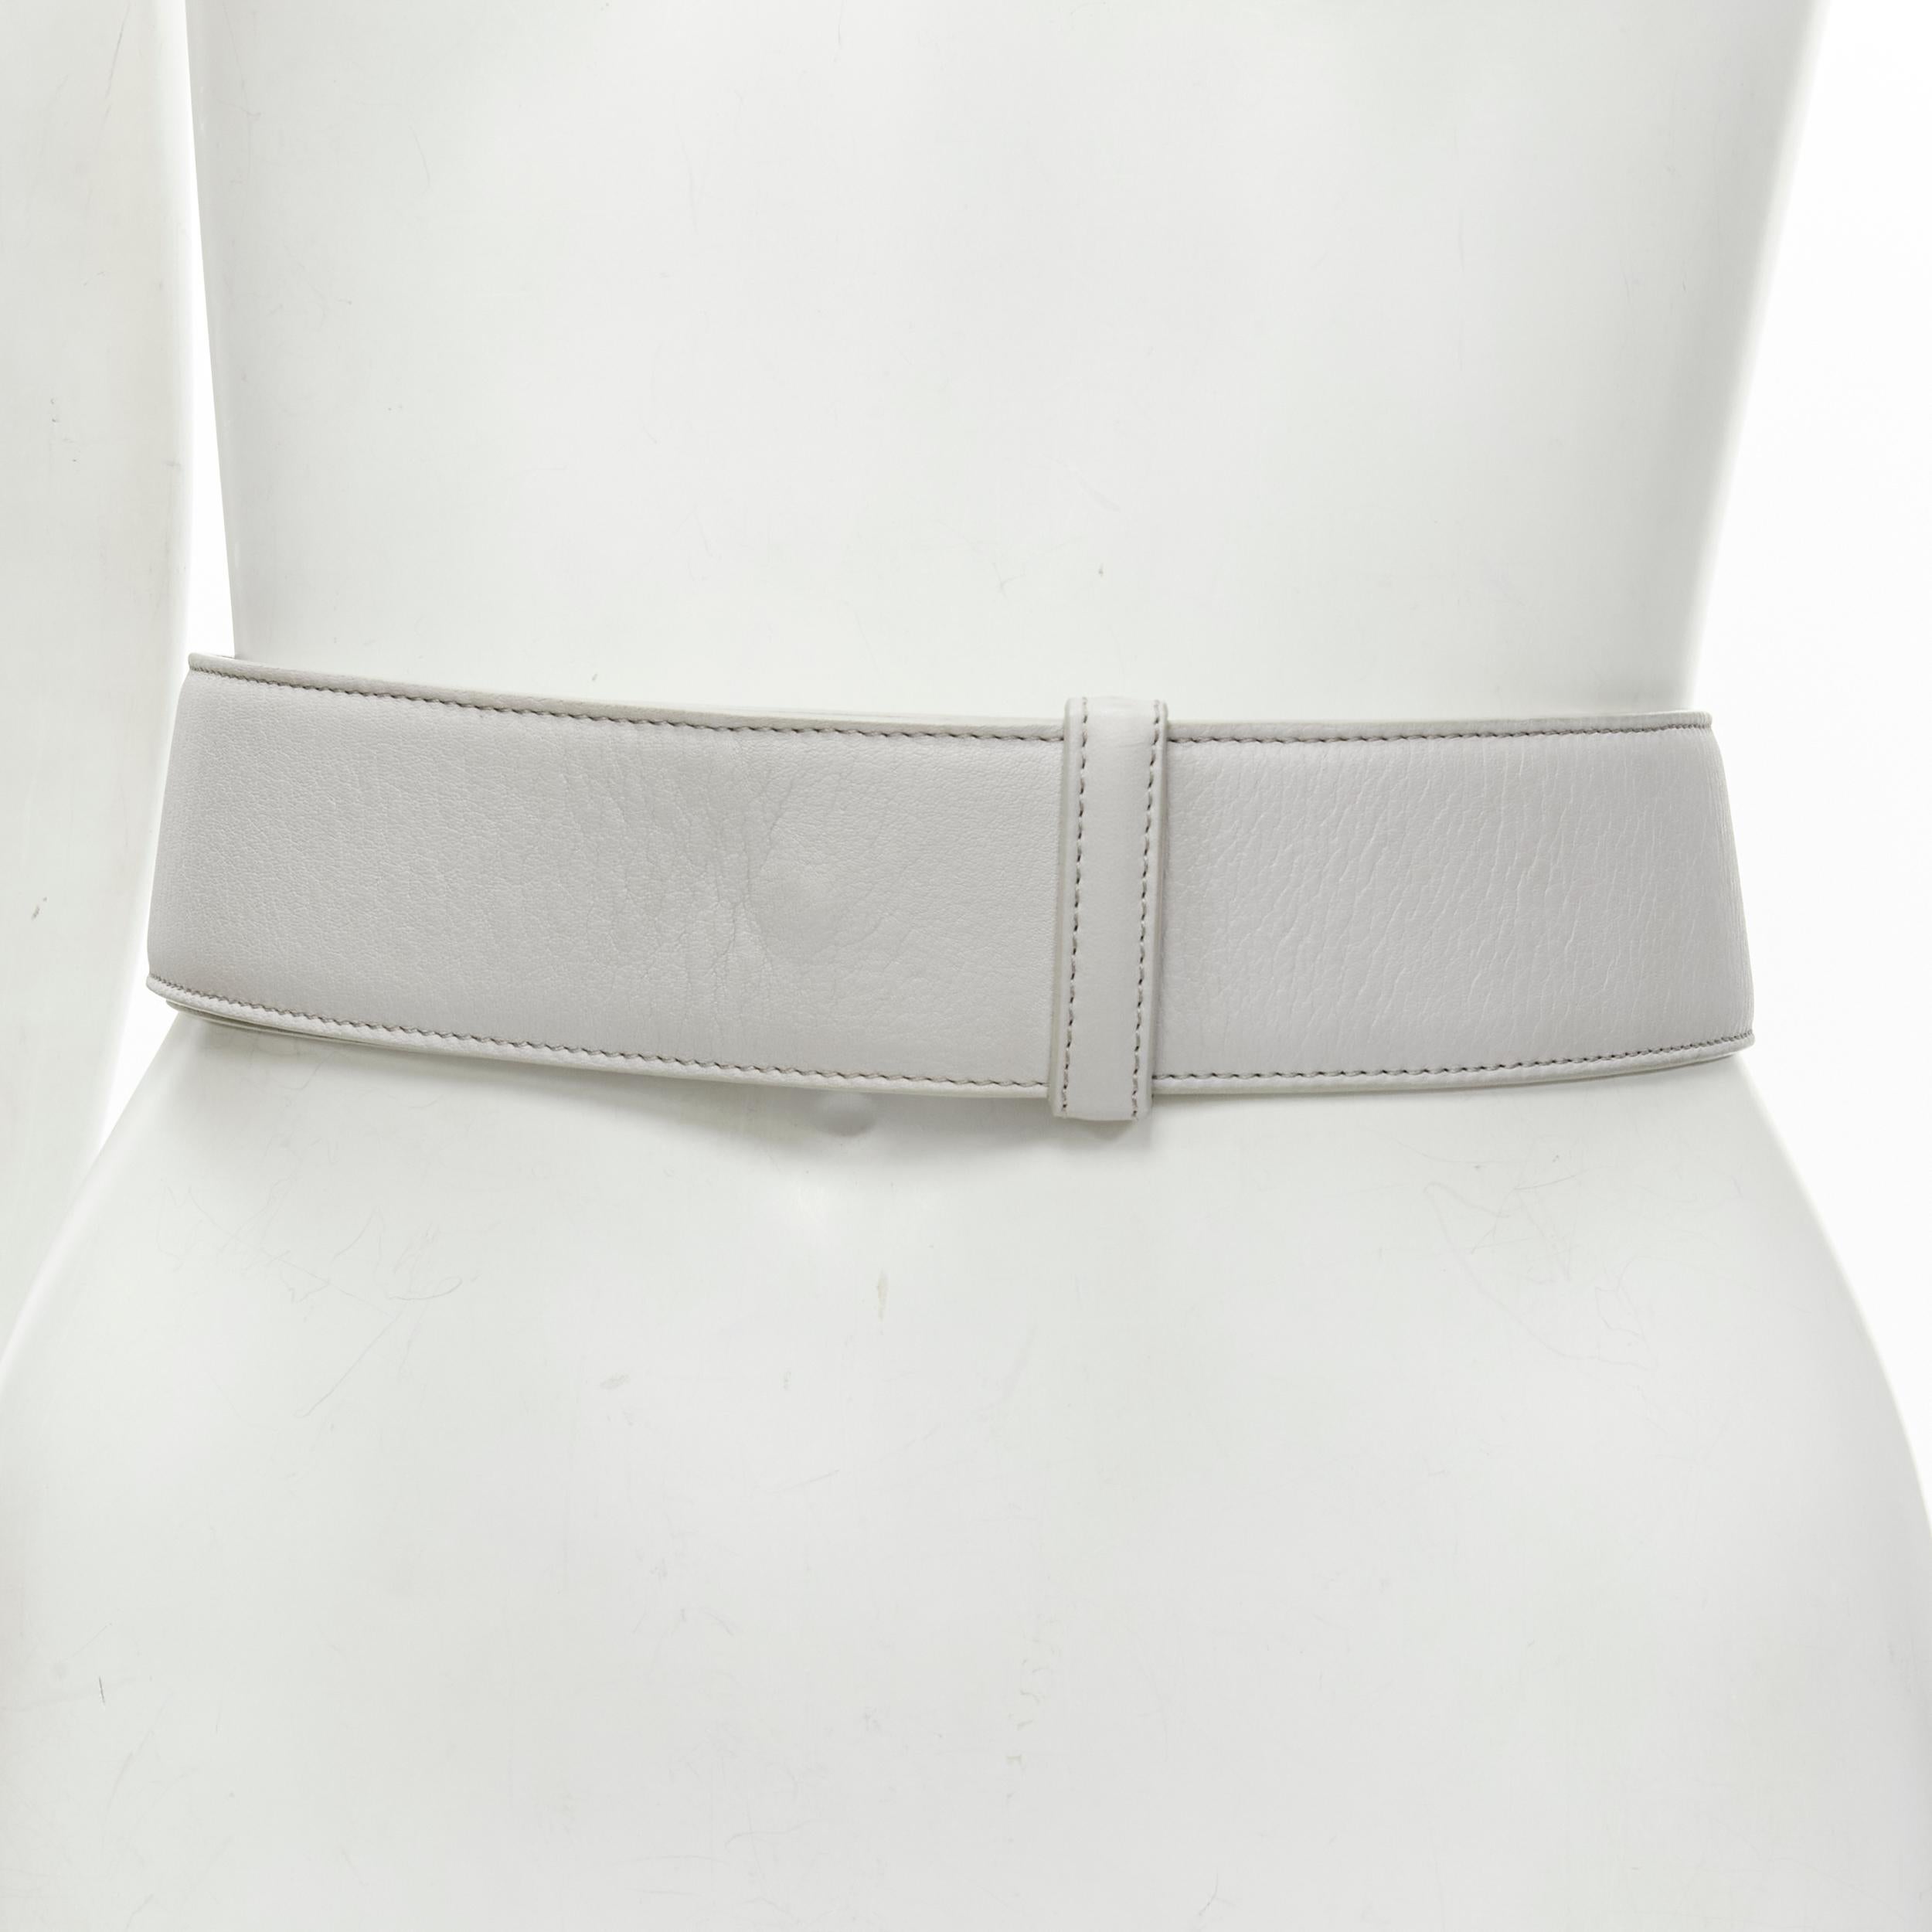 JIL SANDER light grey minimalist wide leather waist belt 75cm
Brand: Jil Sander
Material: Leather
Color: Grey
Pattern: Solid
Closure: Pin
Extra Detail: Minimalist closure. Concealed pin buckle.
Made in: Italy

CONDITION:
Condition: Very good, this